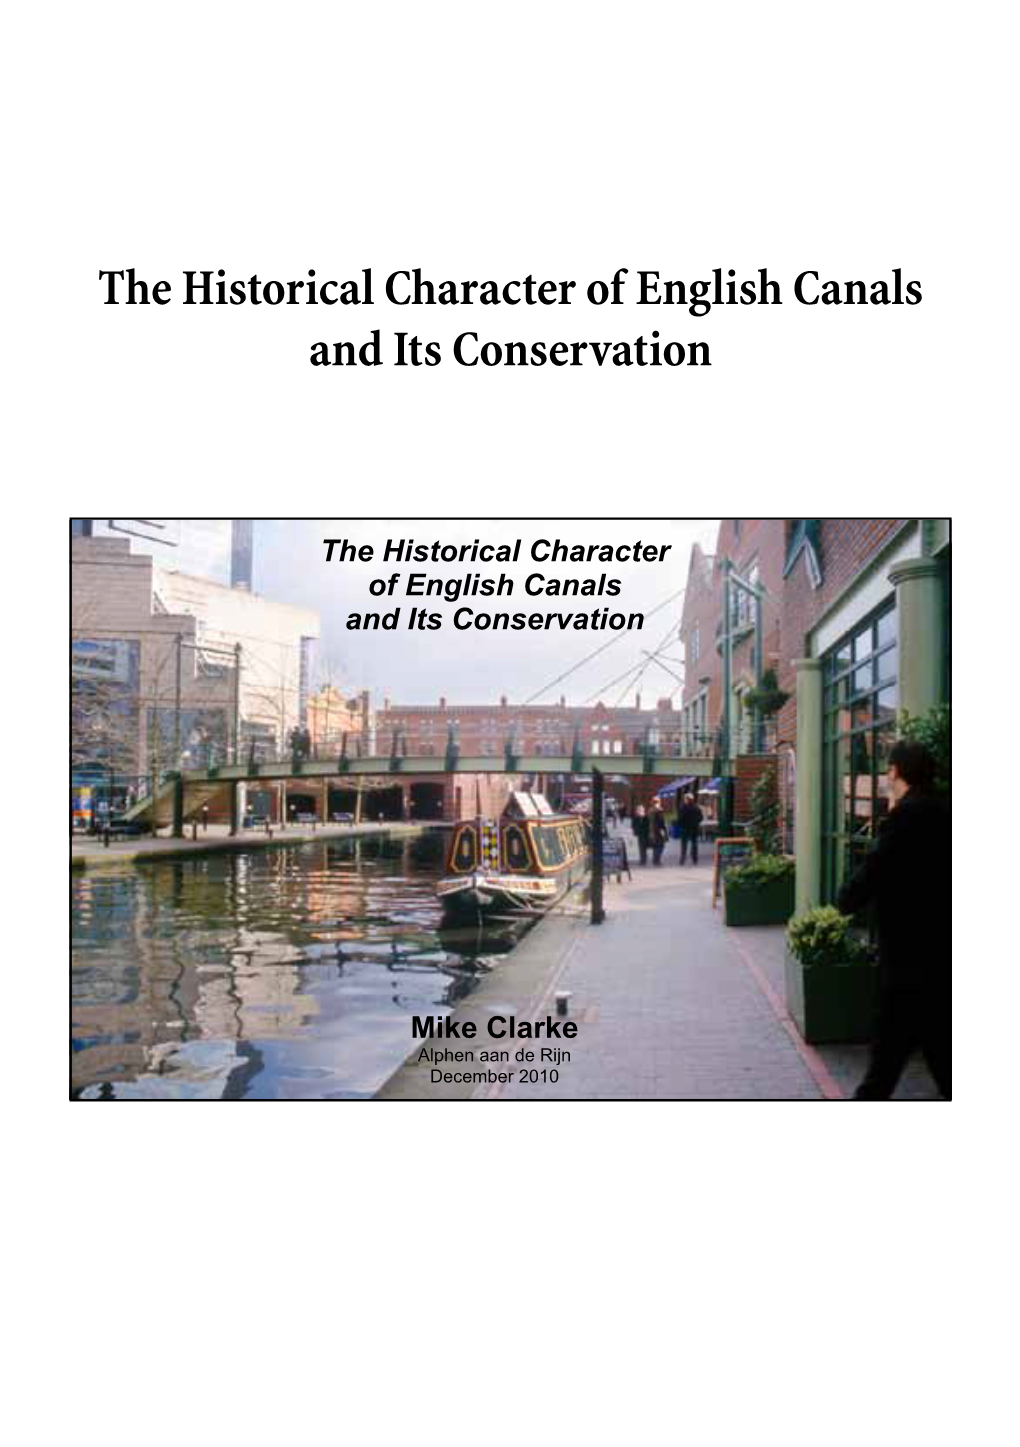 The Historical Character of English Canals and Its Conservation